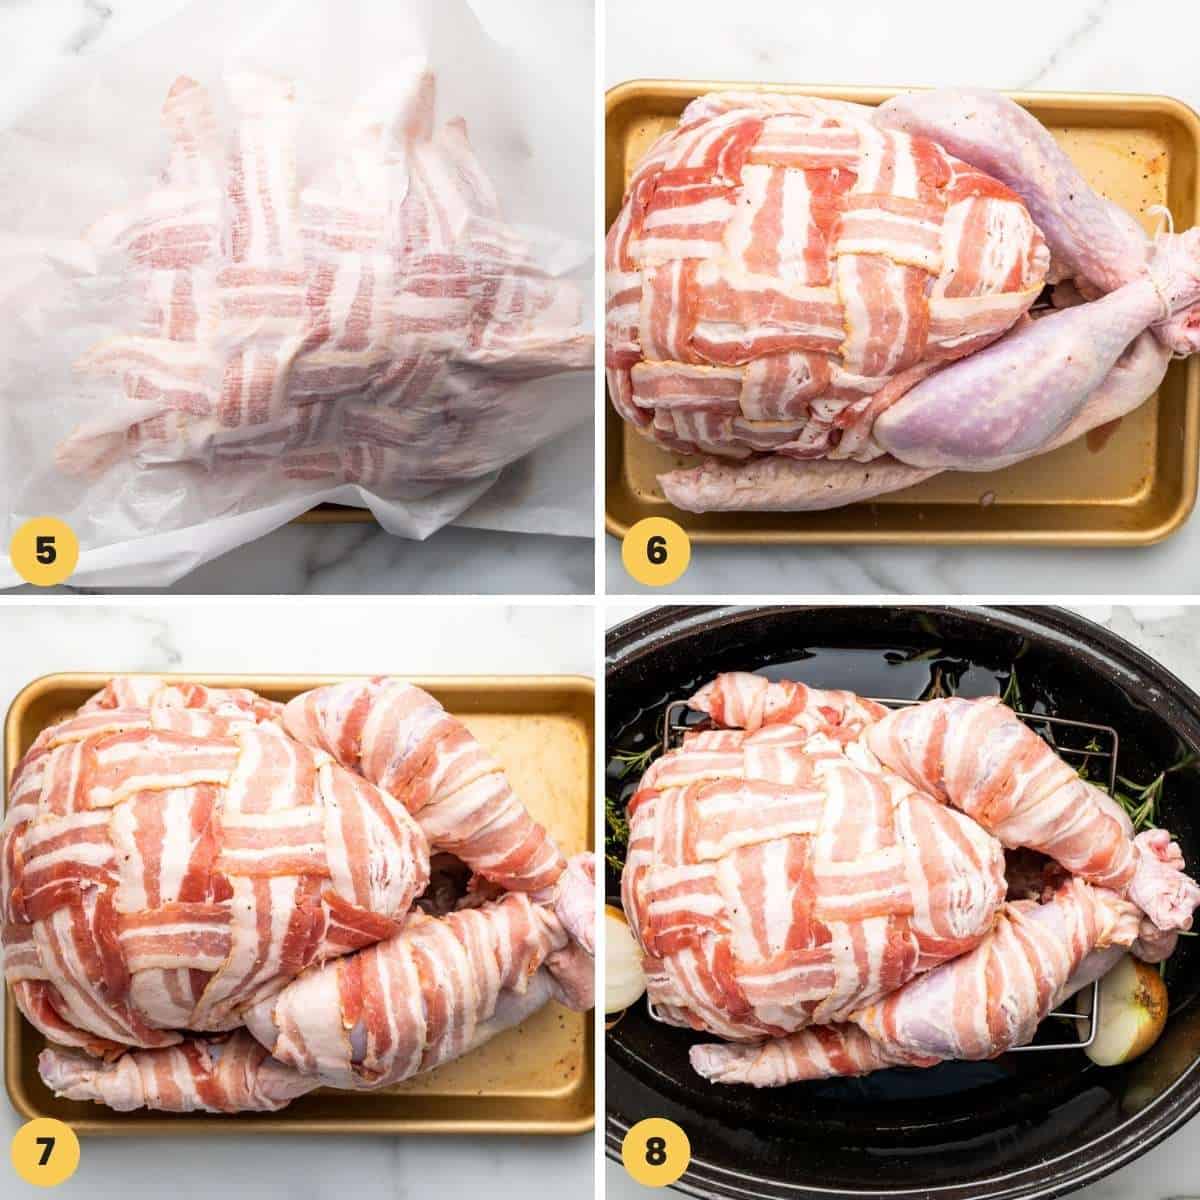 a collage of four images showing steps 5 through 8 of how to make a bacon wrapped turkey